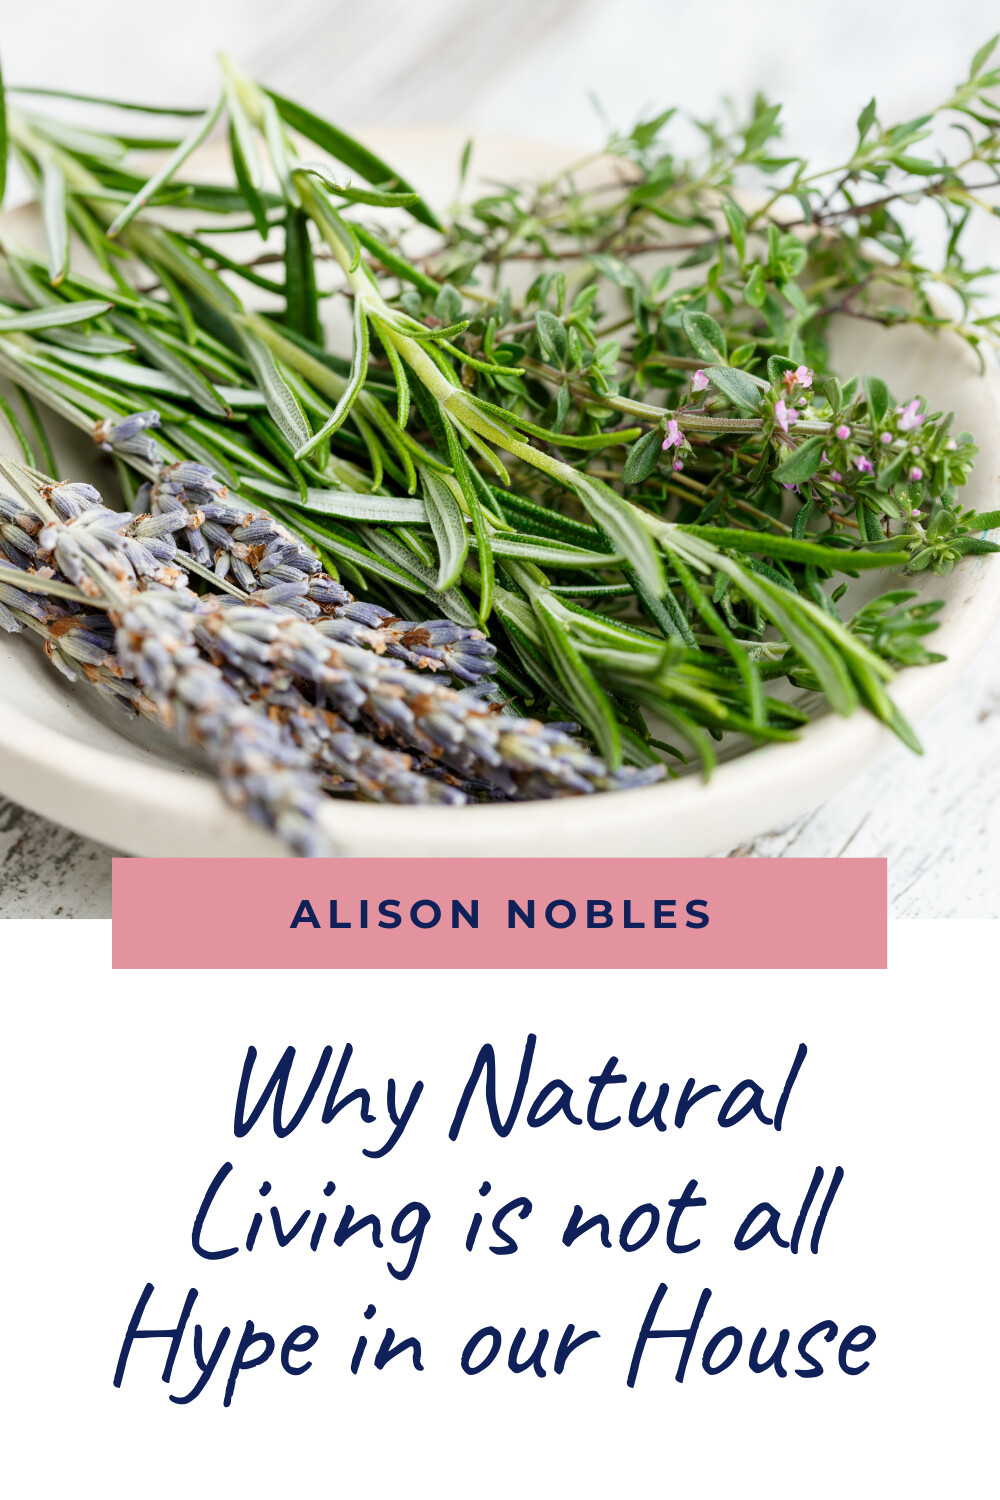 Why Natural Living is not all Hype in our House!